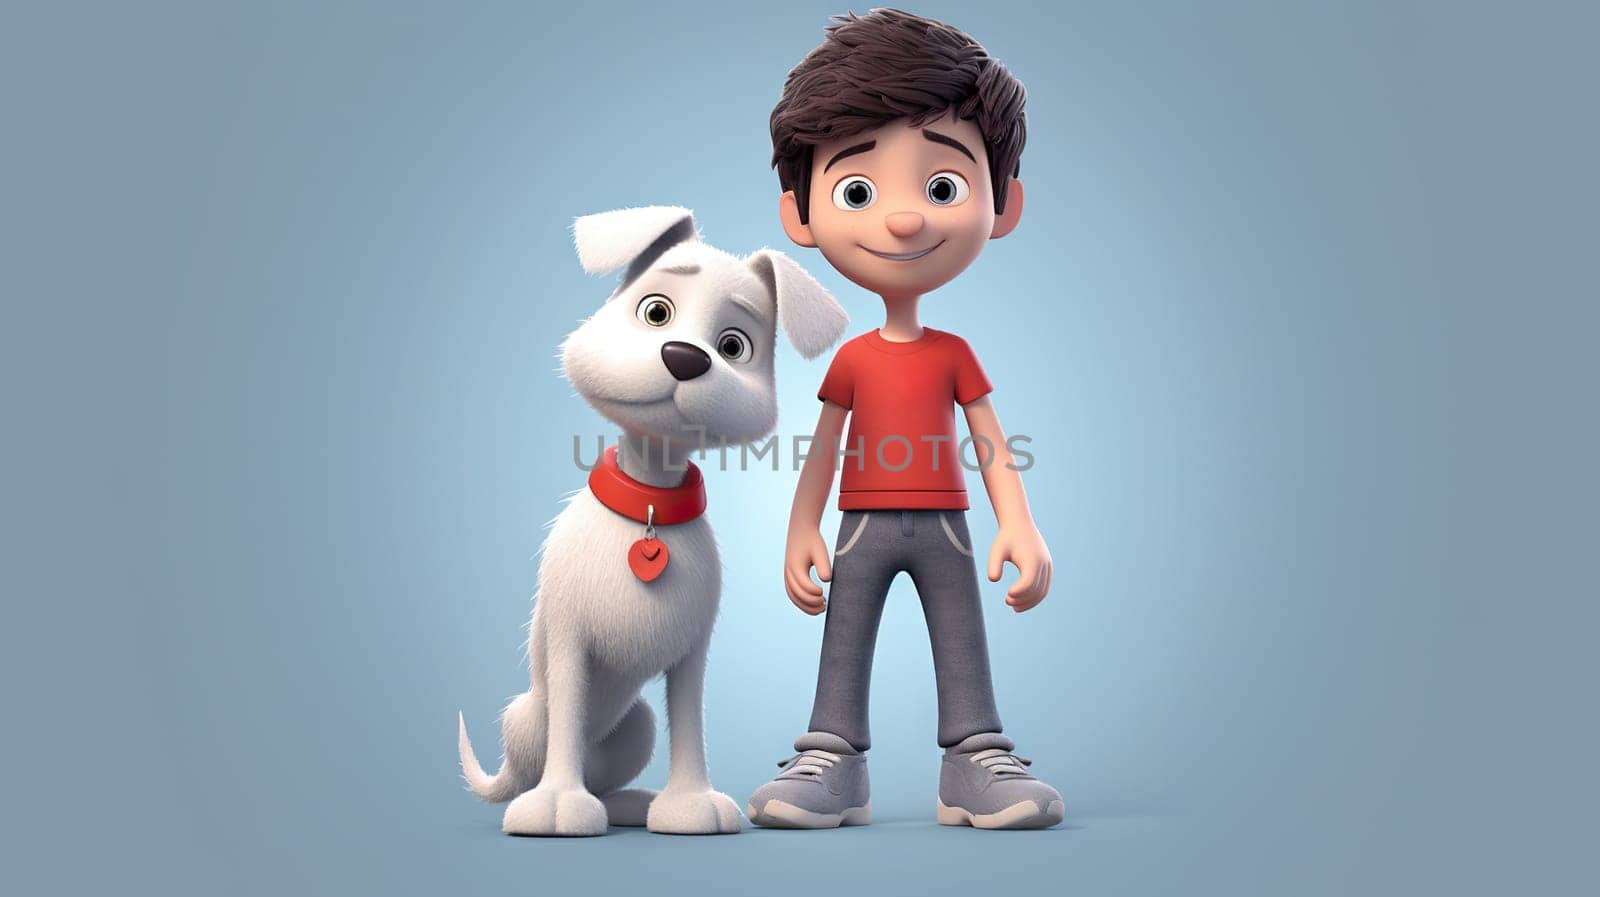 A cheerful cartoon illustration of a young boy with his animated dog friend by chrisroll